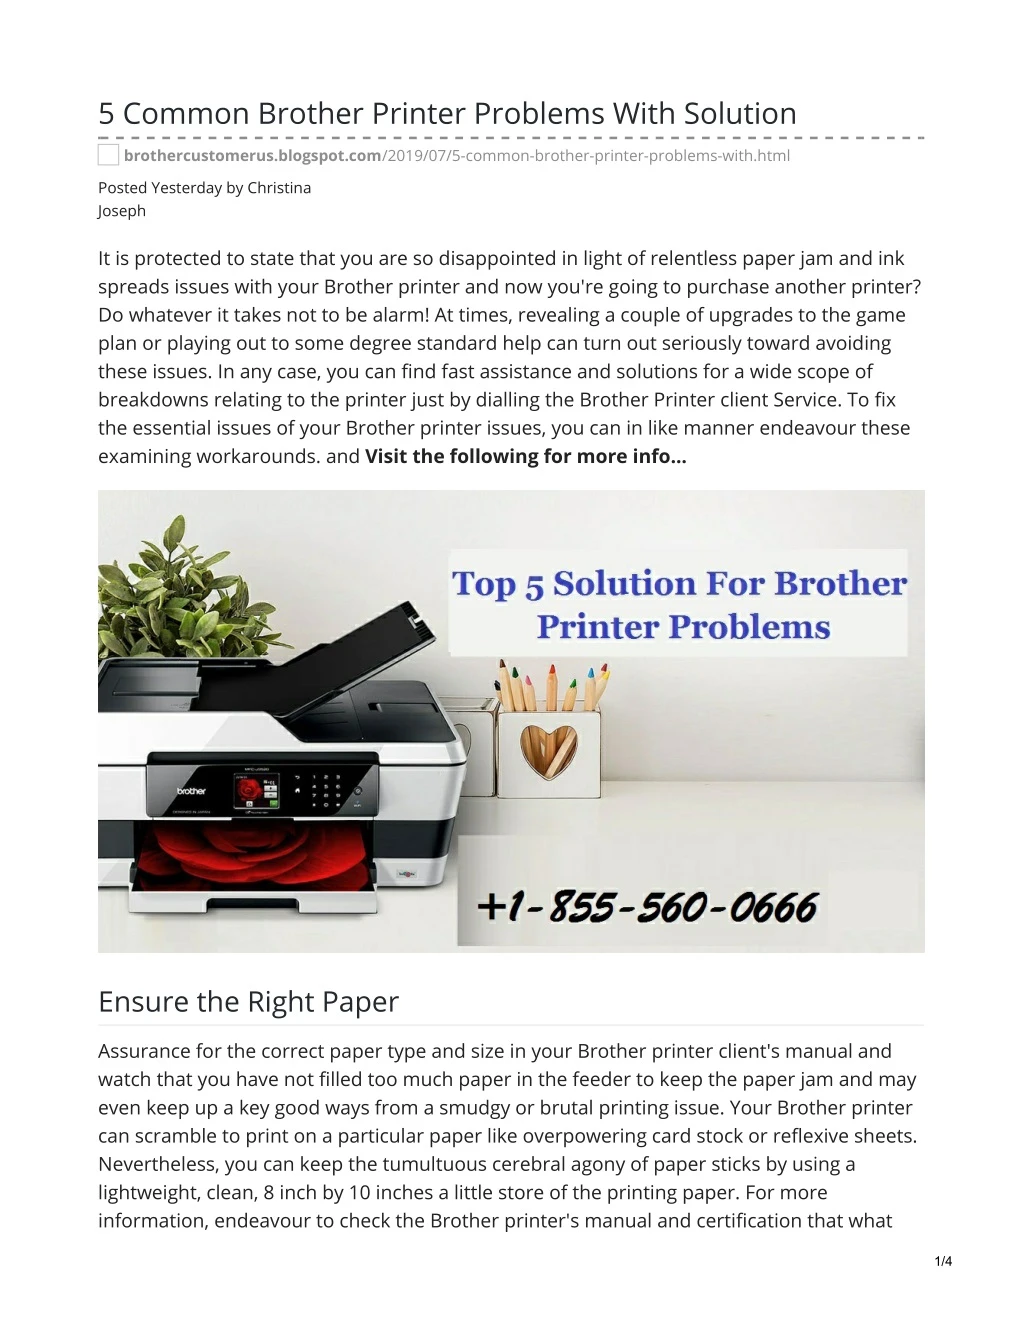 5 common brother printer problems with solution